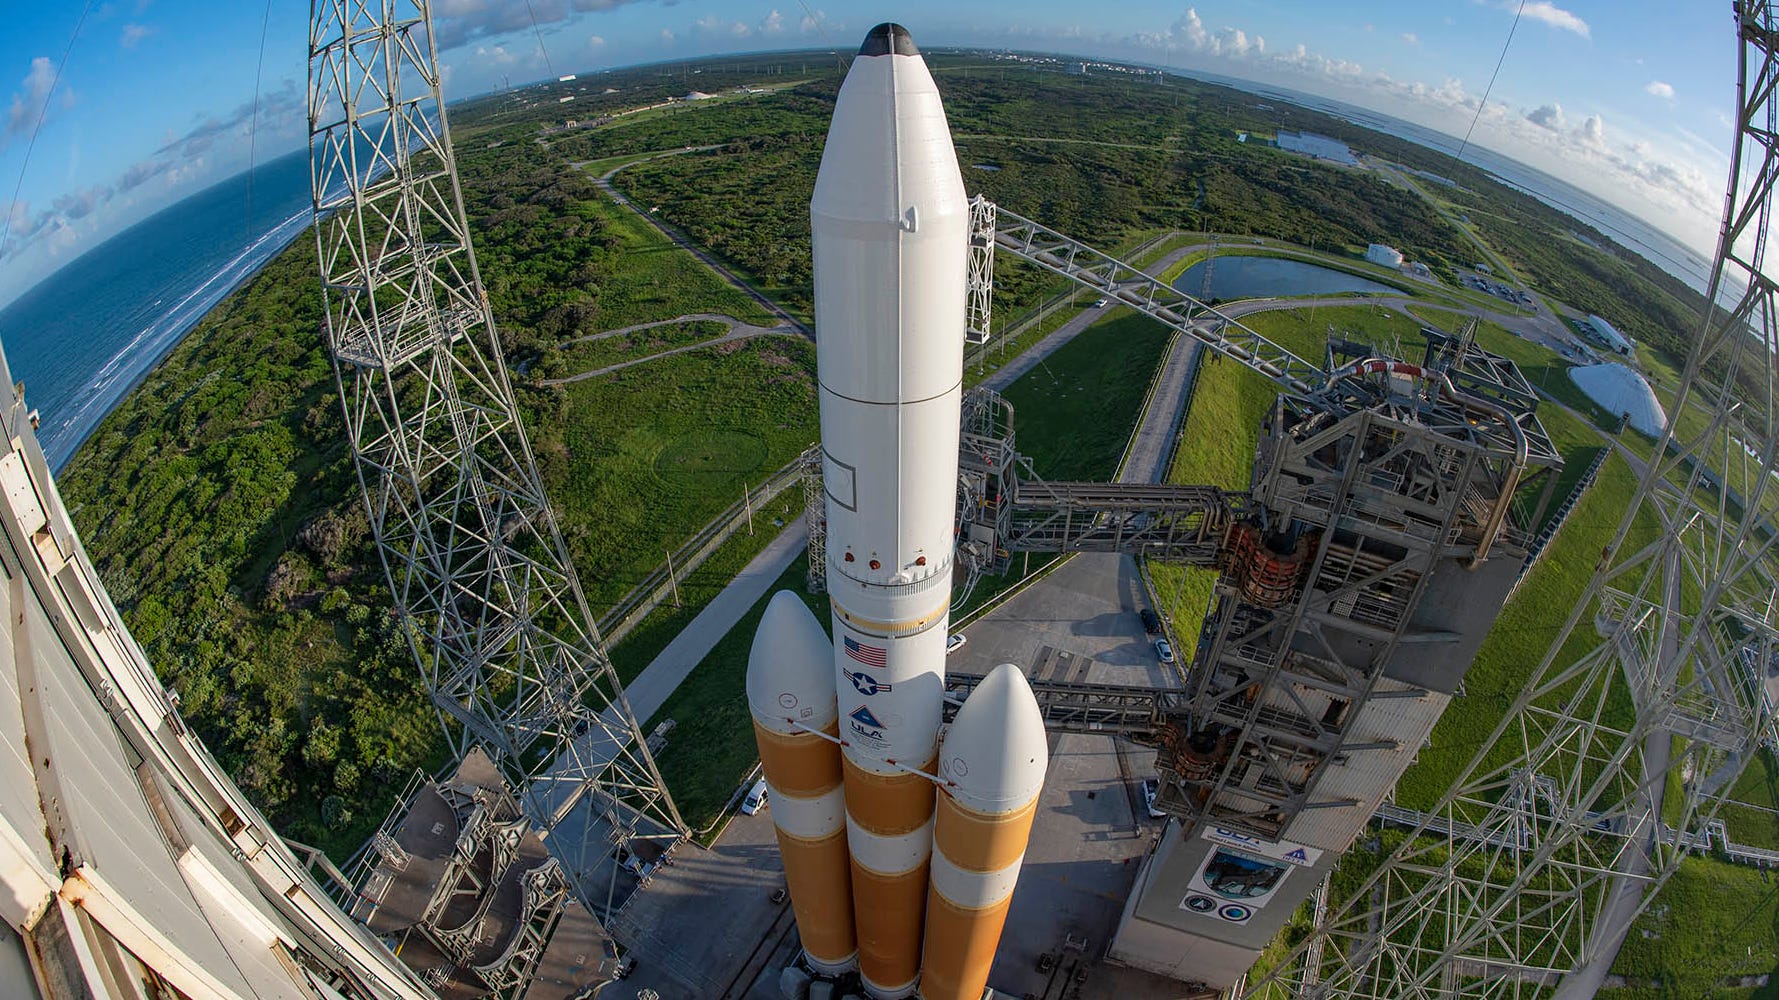 Space Coast gearing up for three rocket launches before end of month